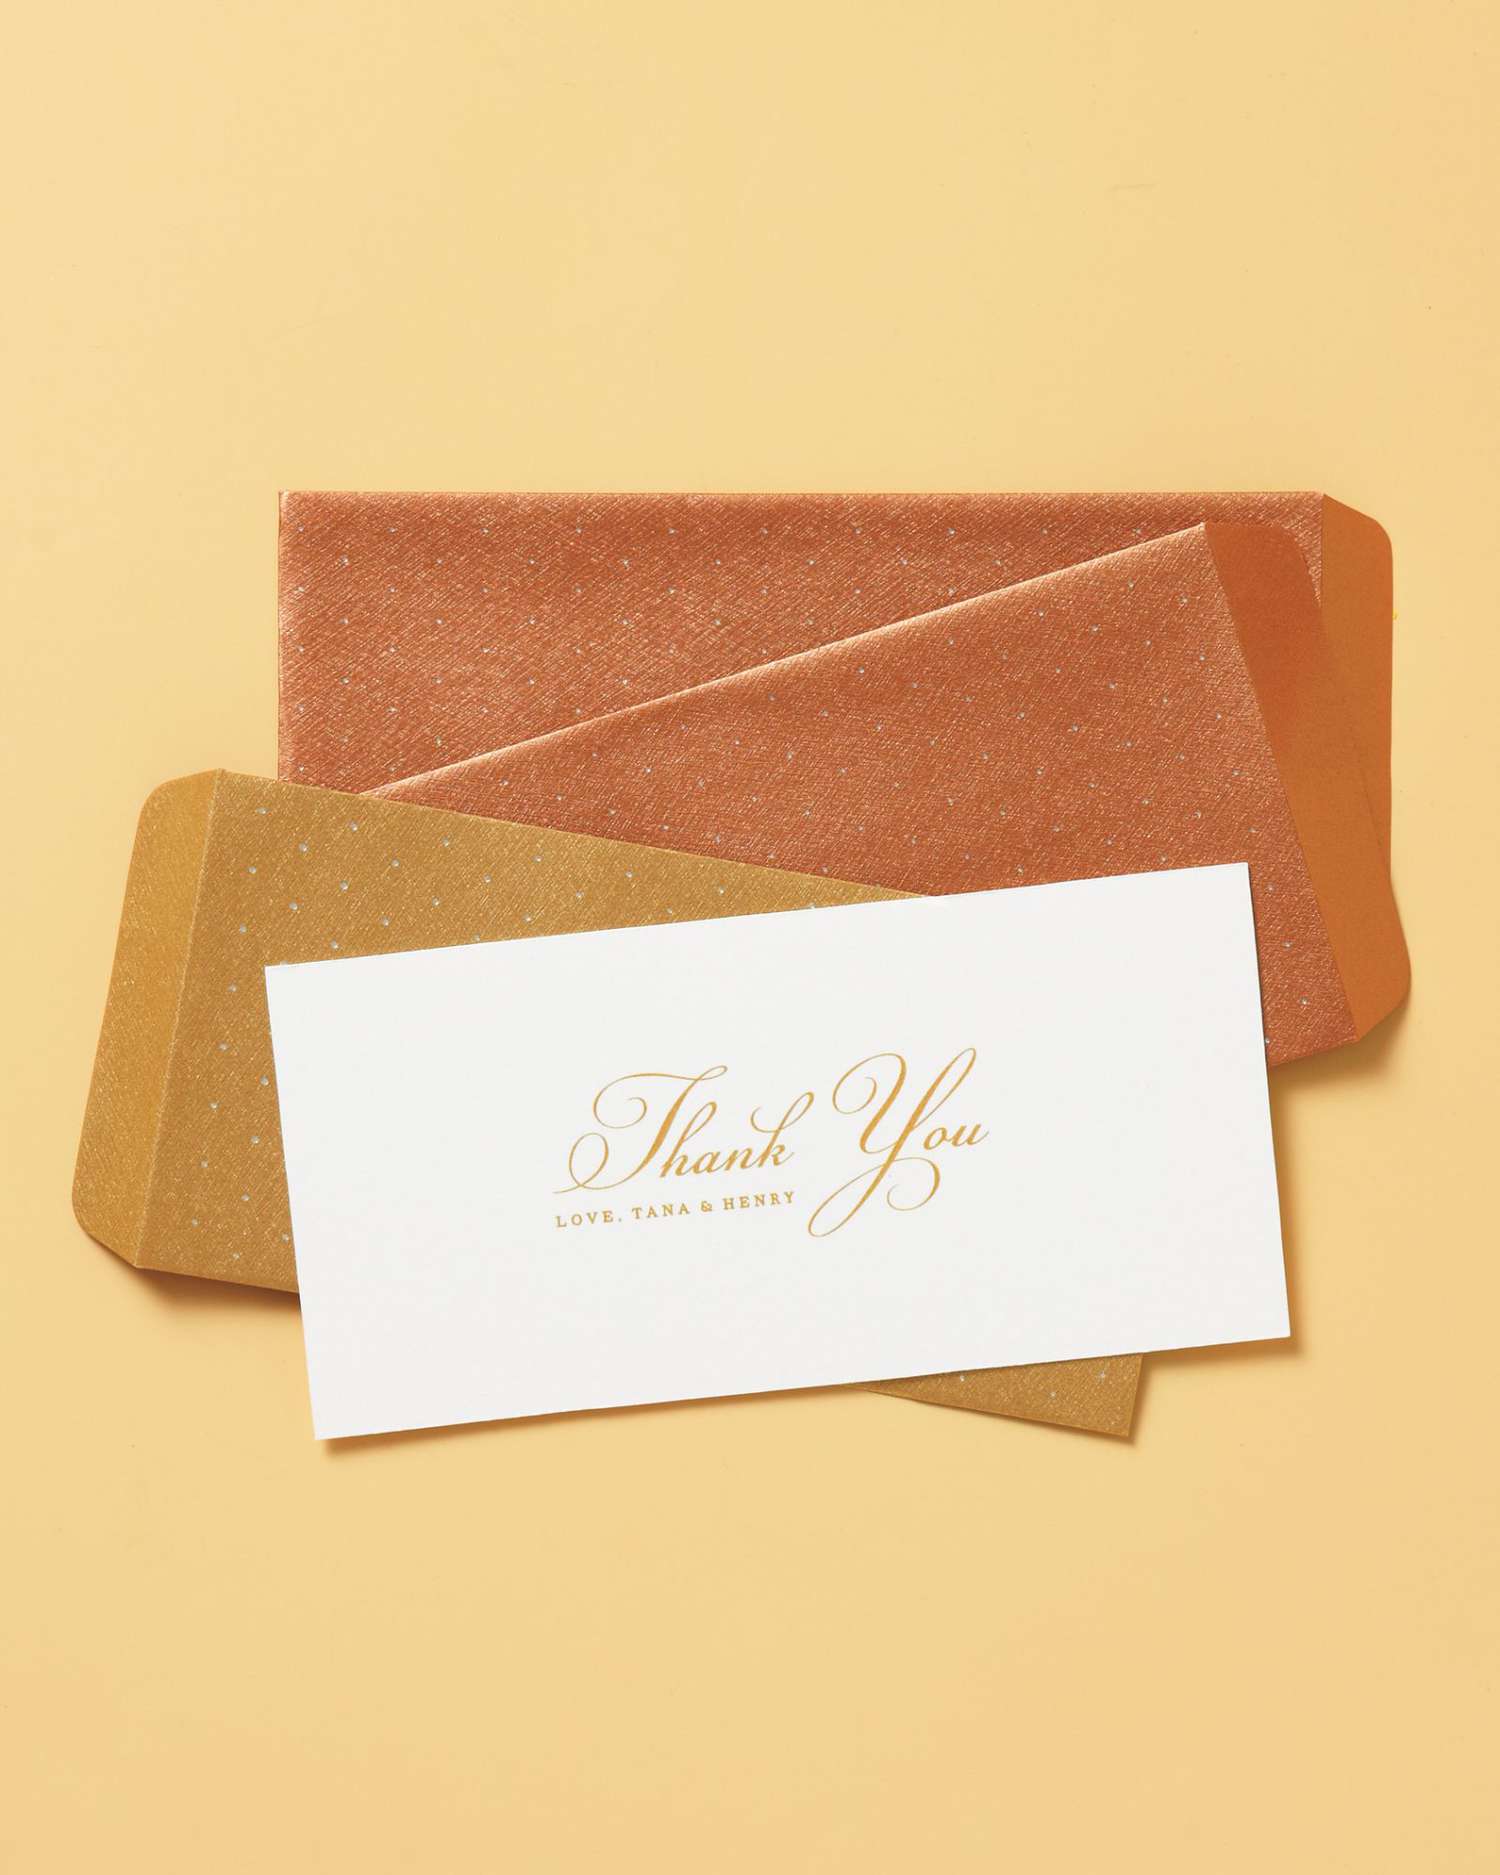 Send Your Note in Style